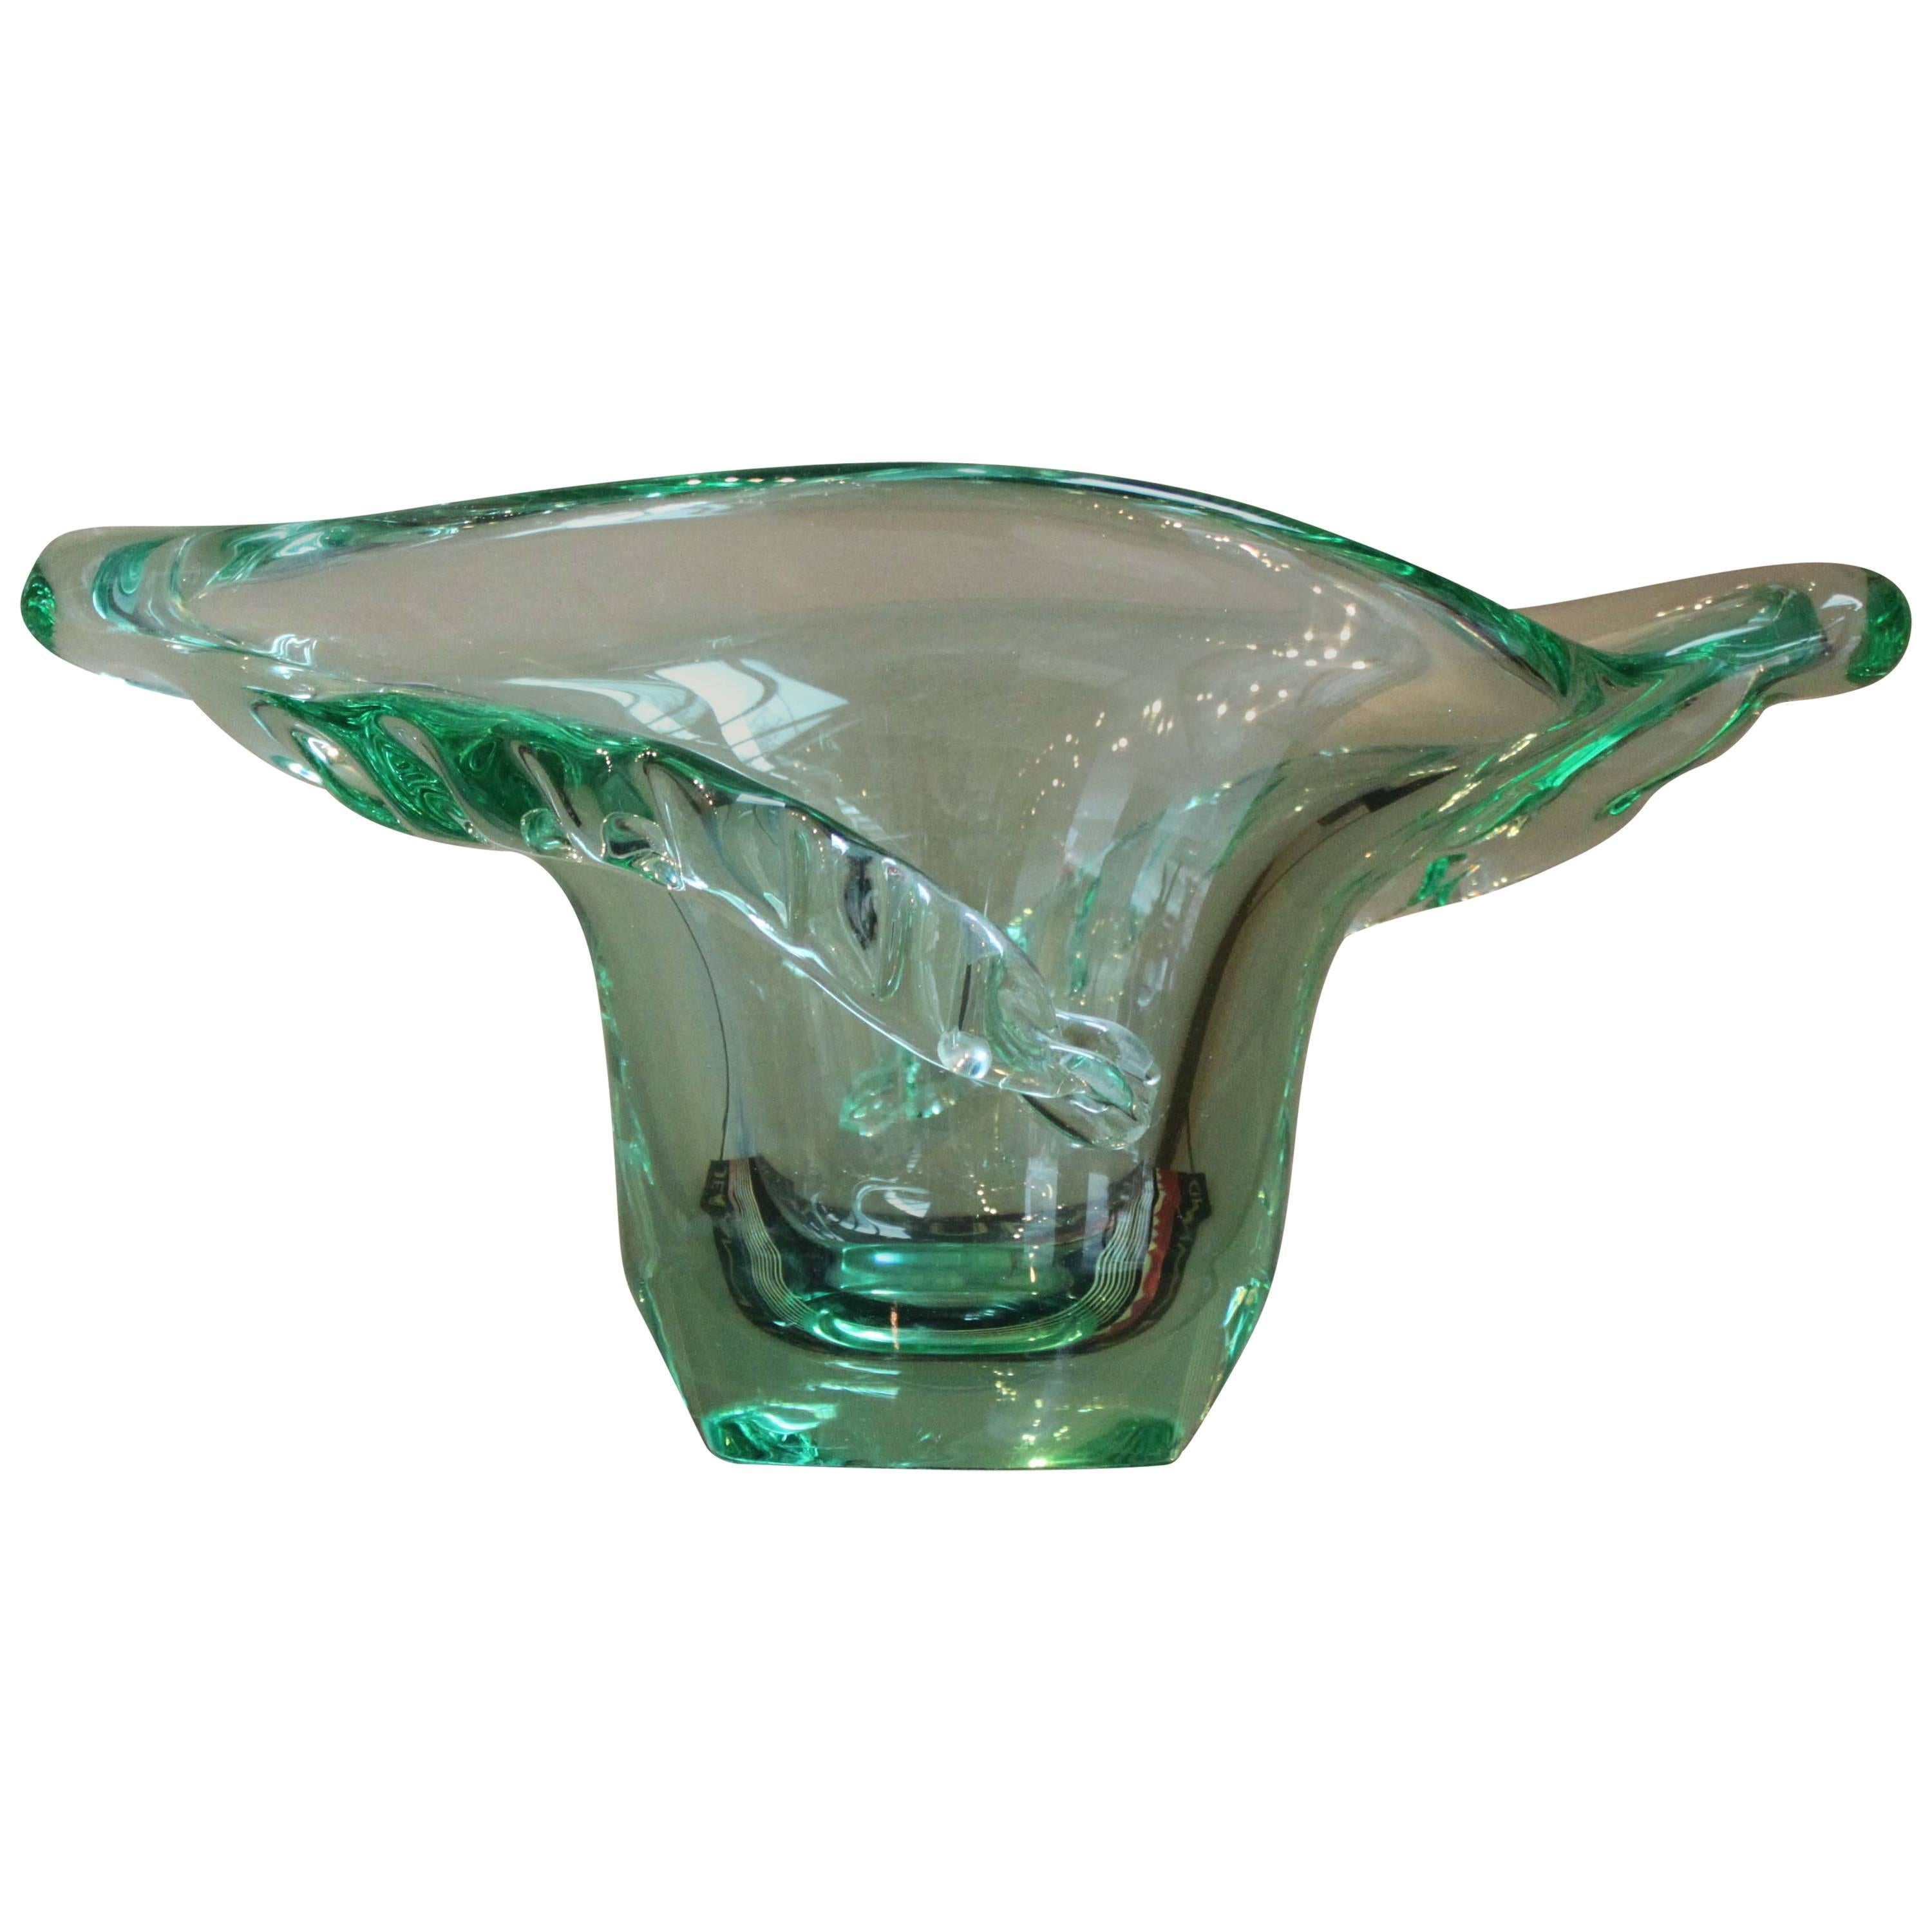 A beautiful organic green vase by Daum and signed 